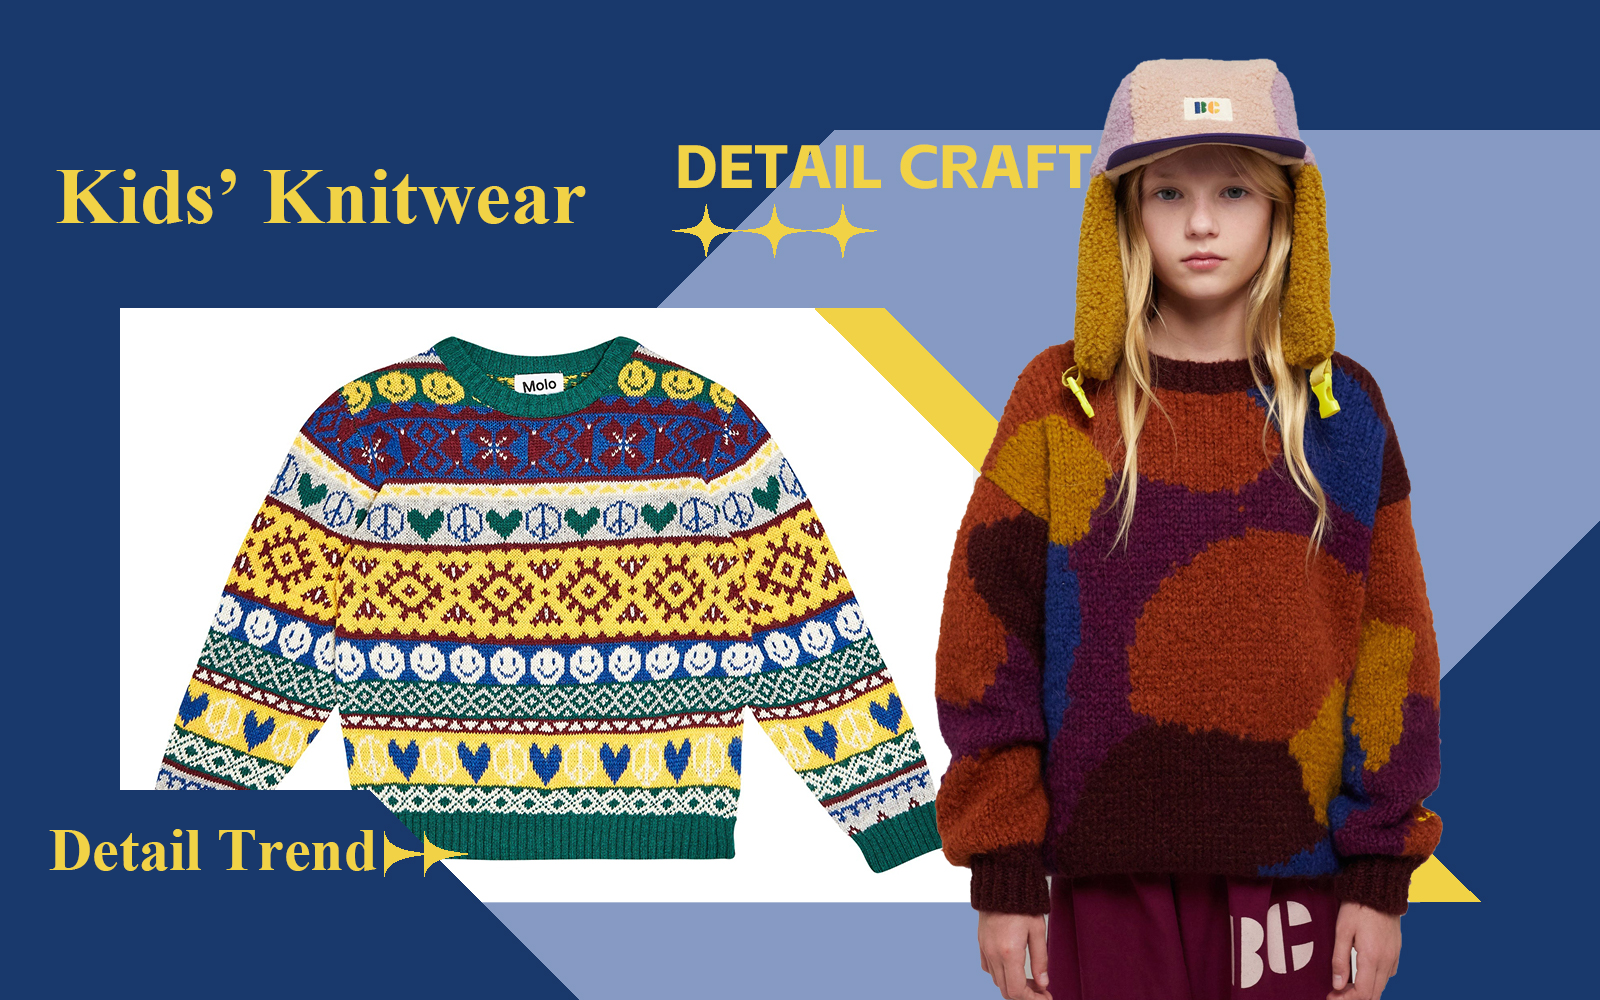 The Detail & Craft Trend for Kids' Knitwear